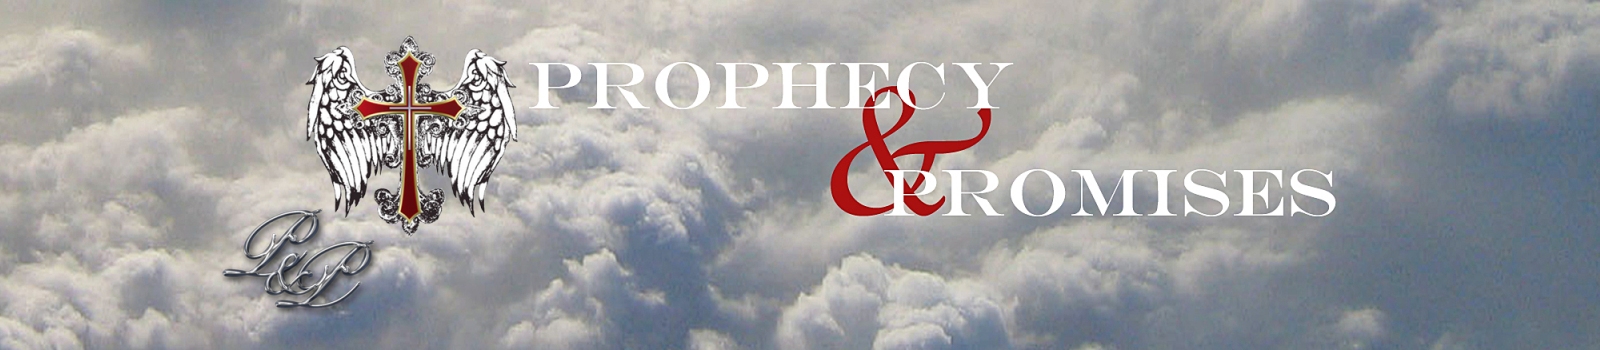 Prophecy and Promises Homepage